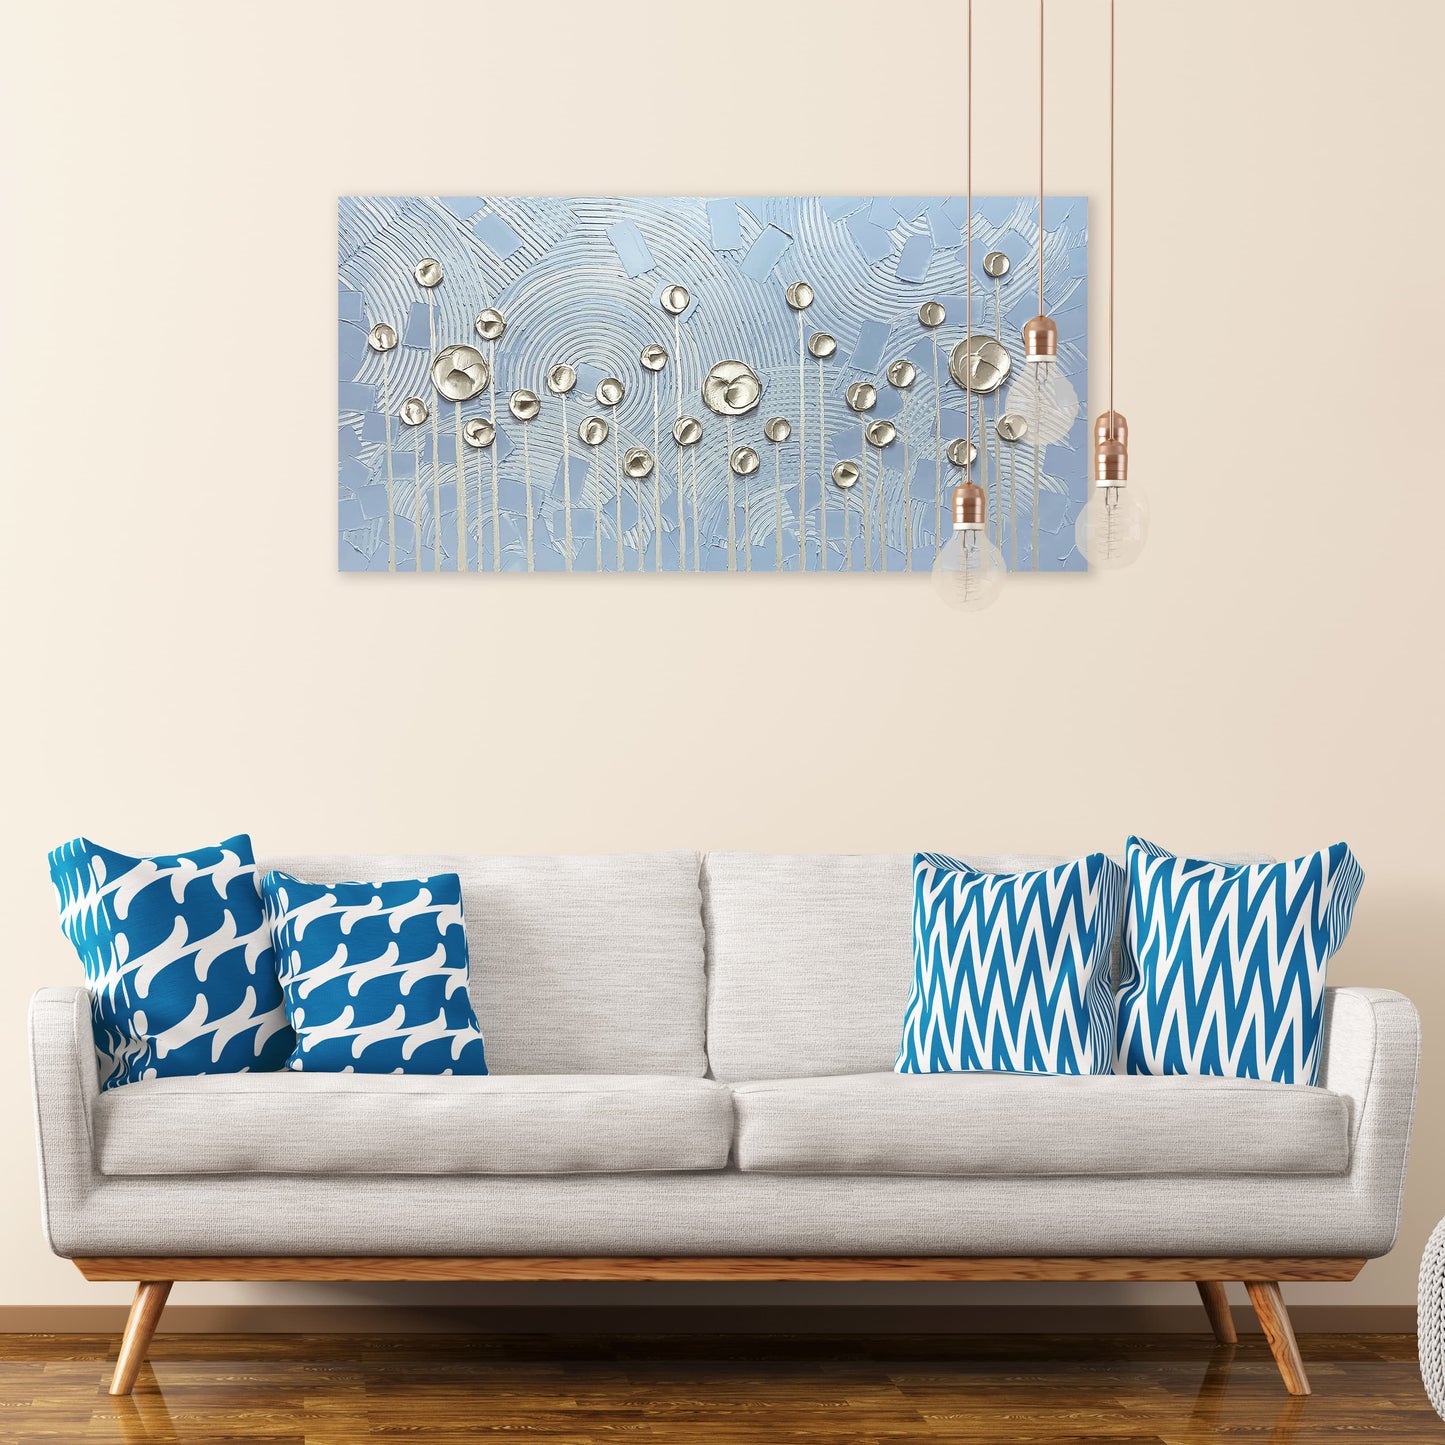 Abstract Art "Blooms at Dawn" Hand-painted on Wrapped Canvas for Home Decor